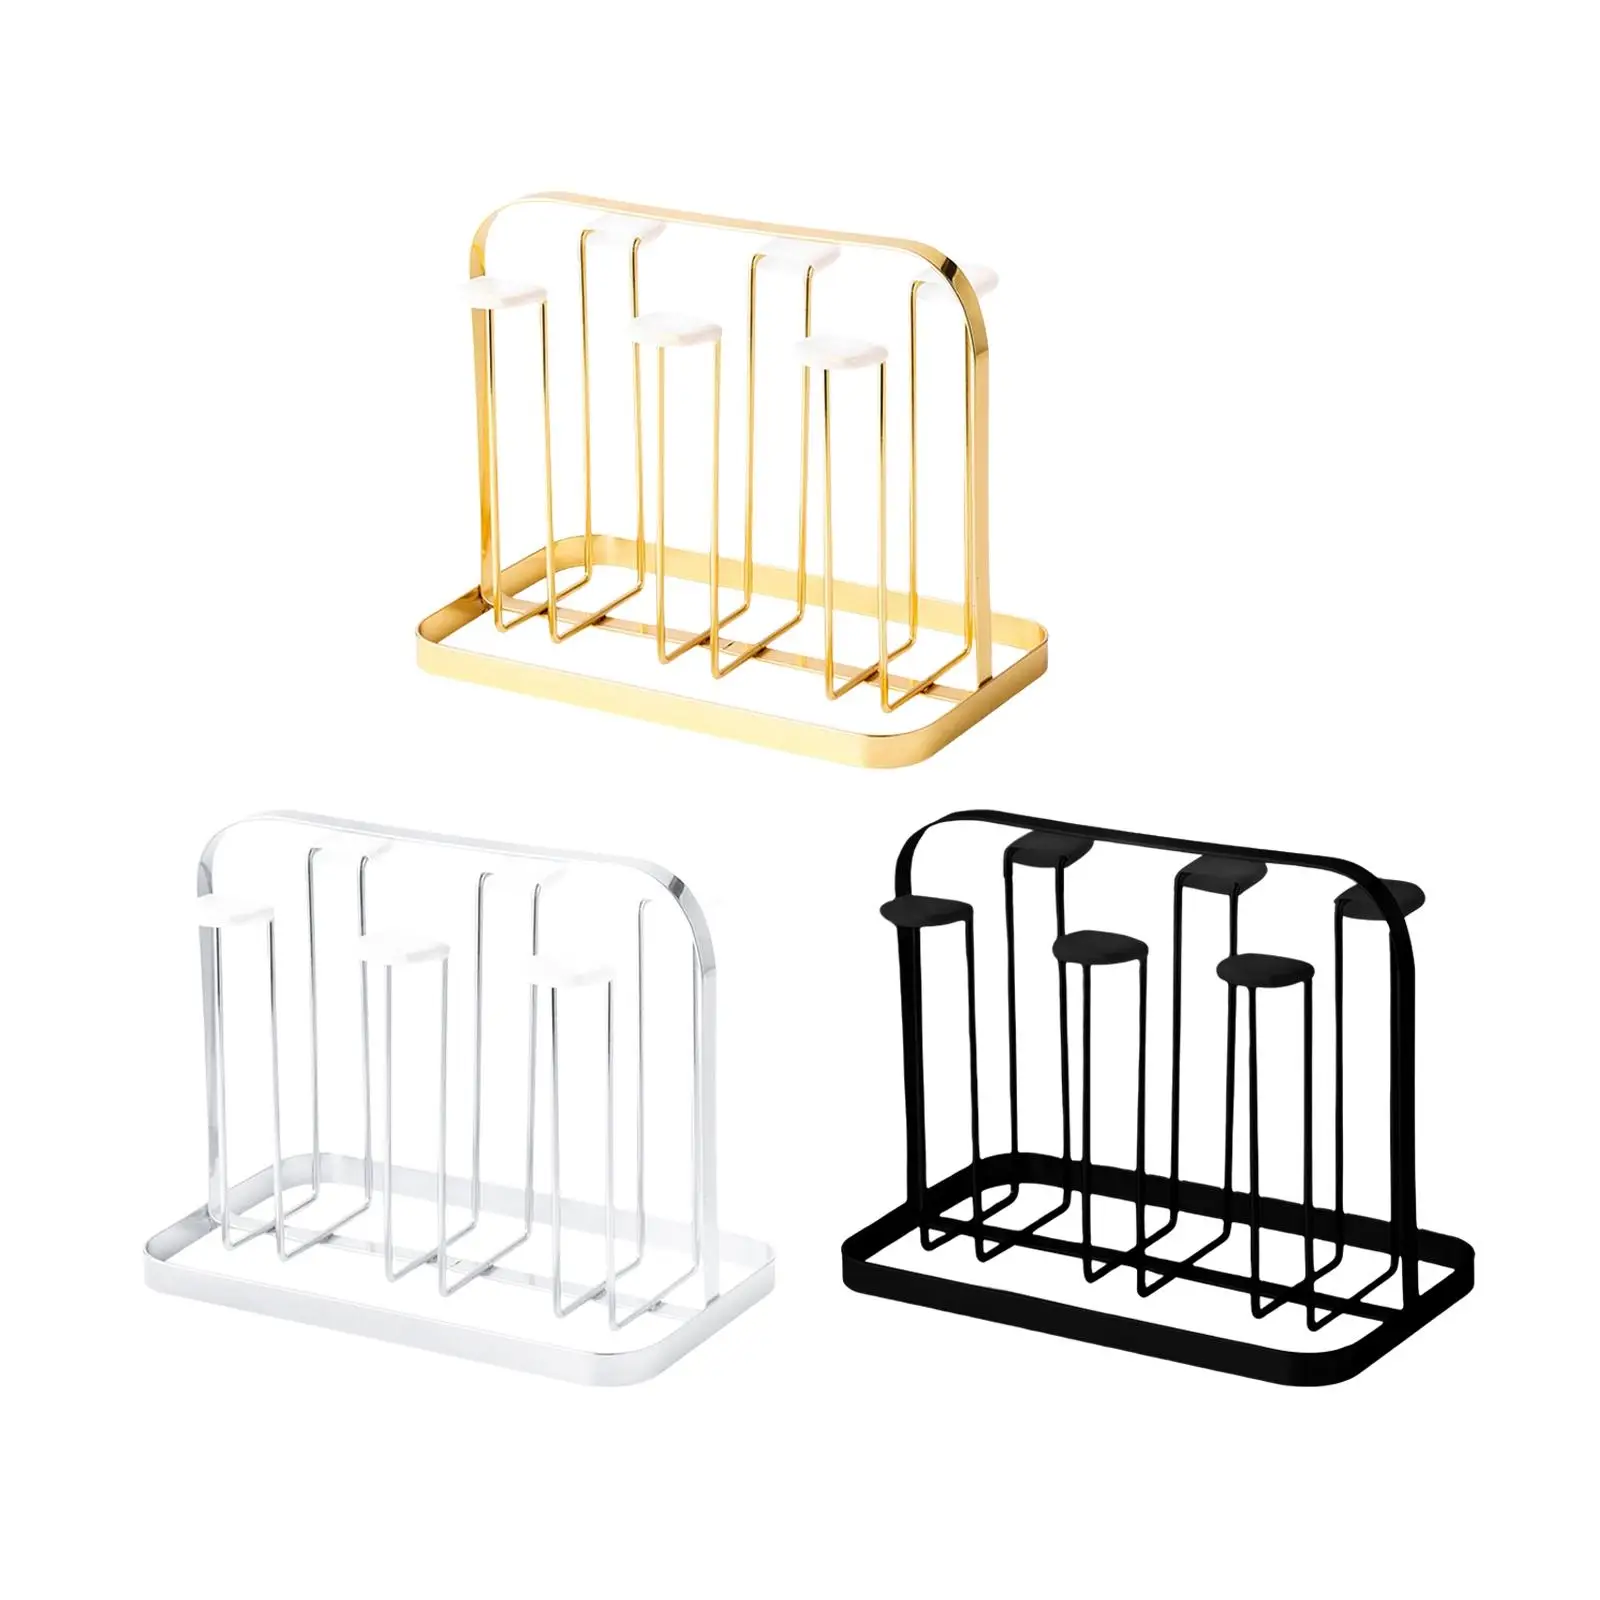 Stylish Coffee Mug Drying Holder Glasses Tea Cup Organizer 6 Cups Hanger Silicone Protective Hooks for Home Cafe Kitchen